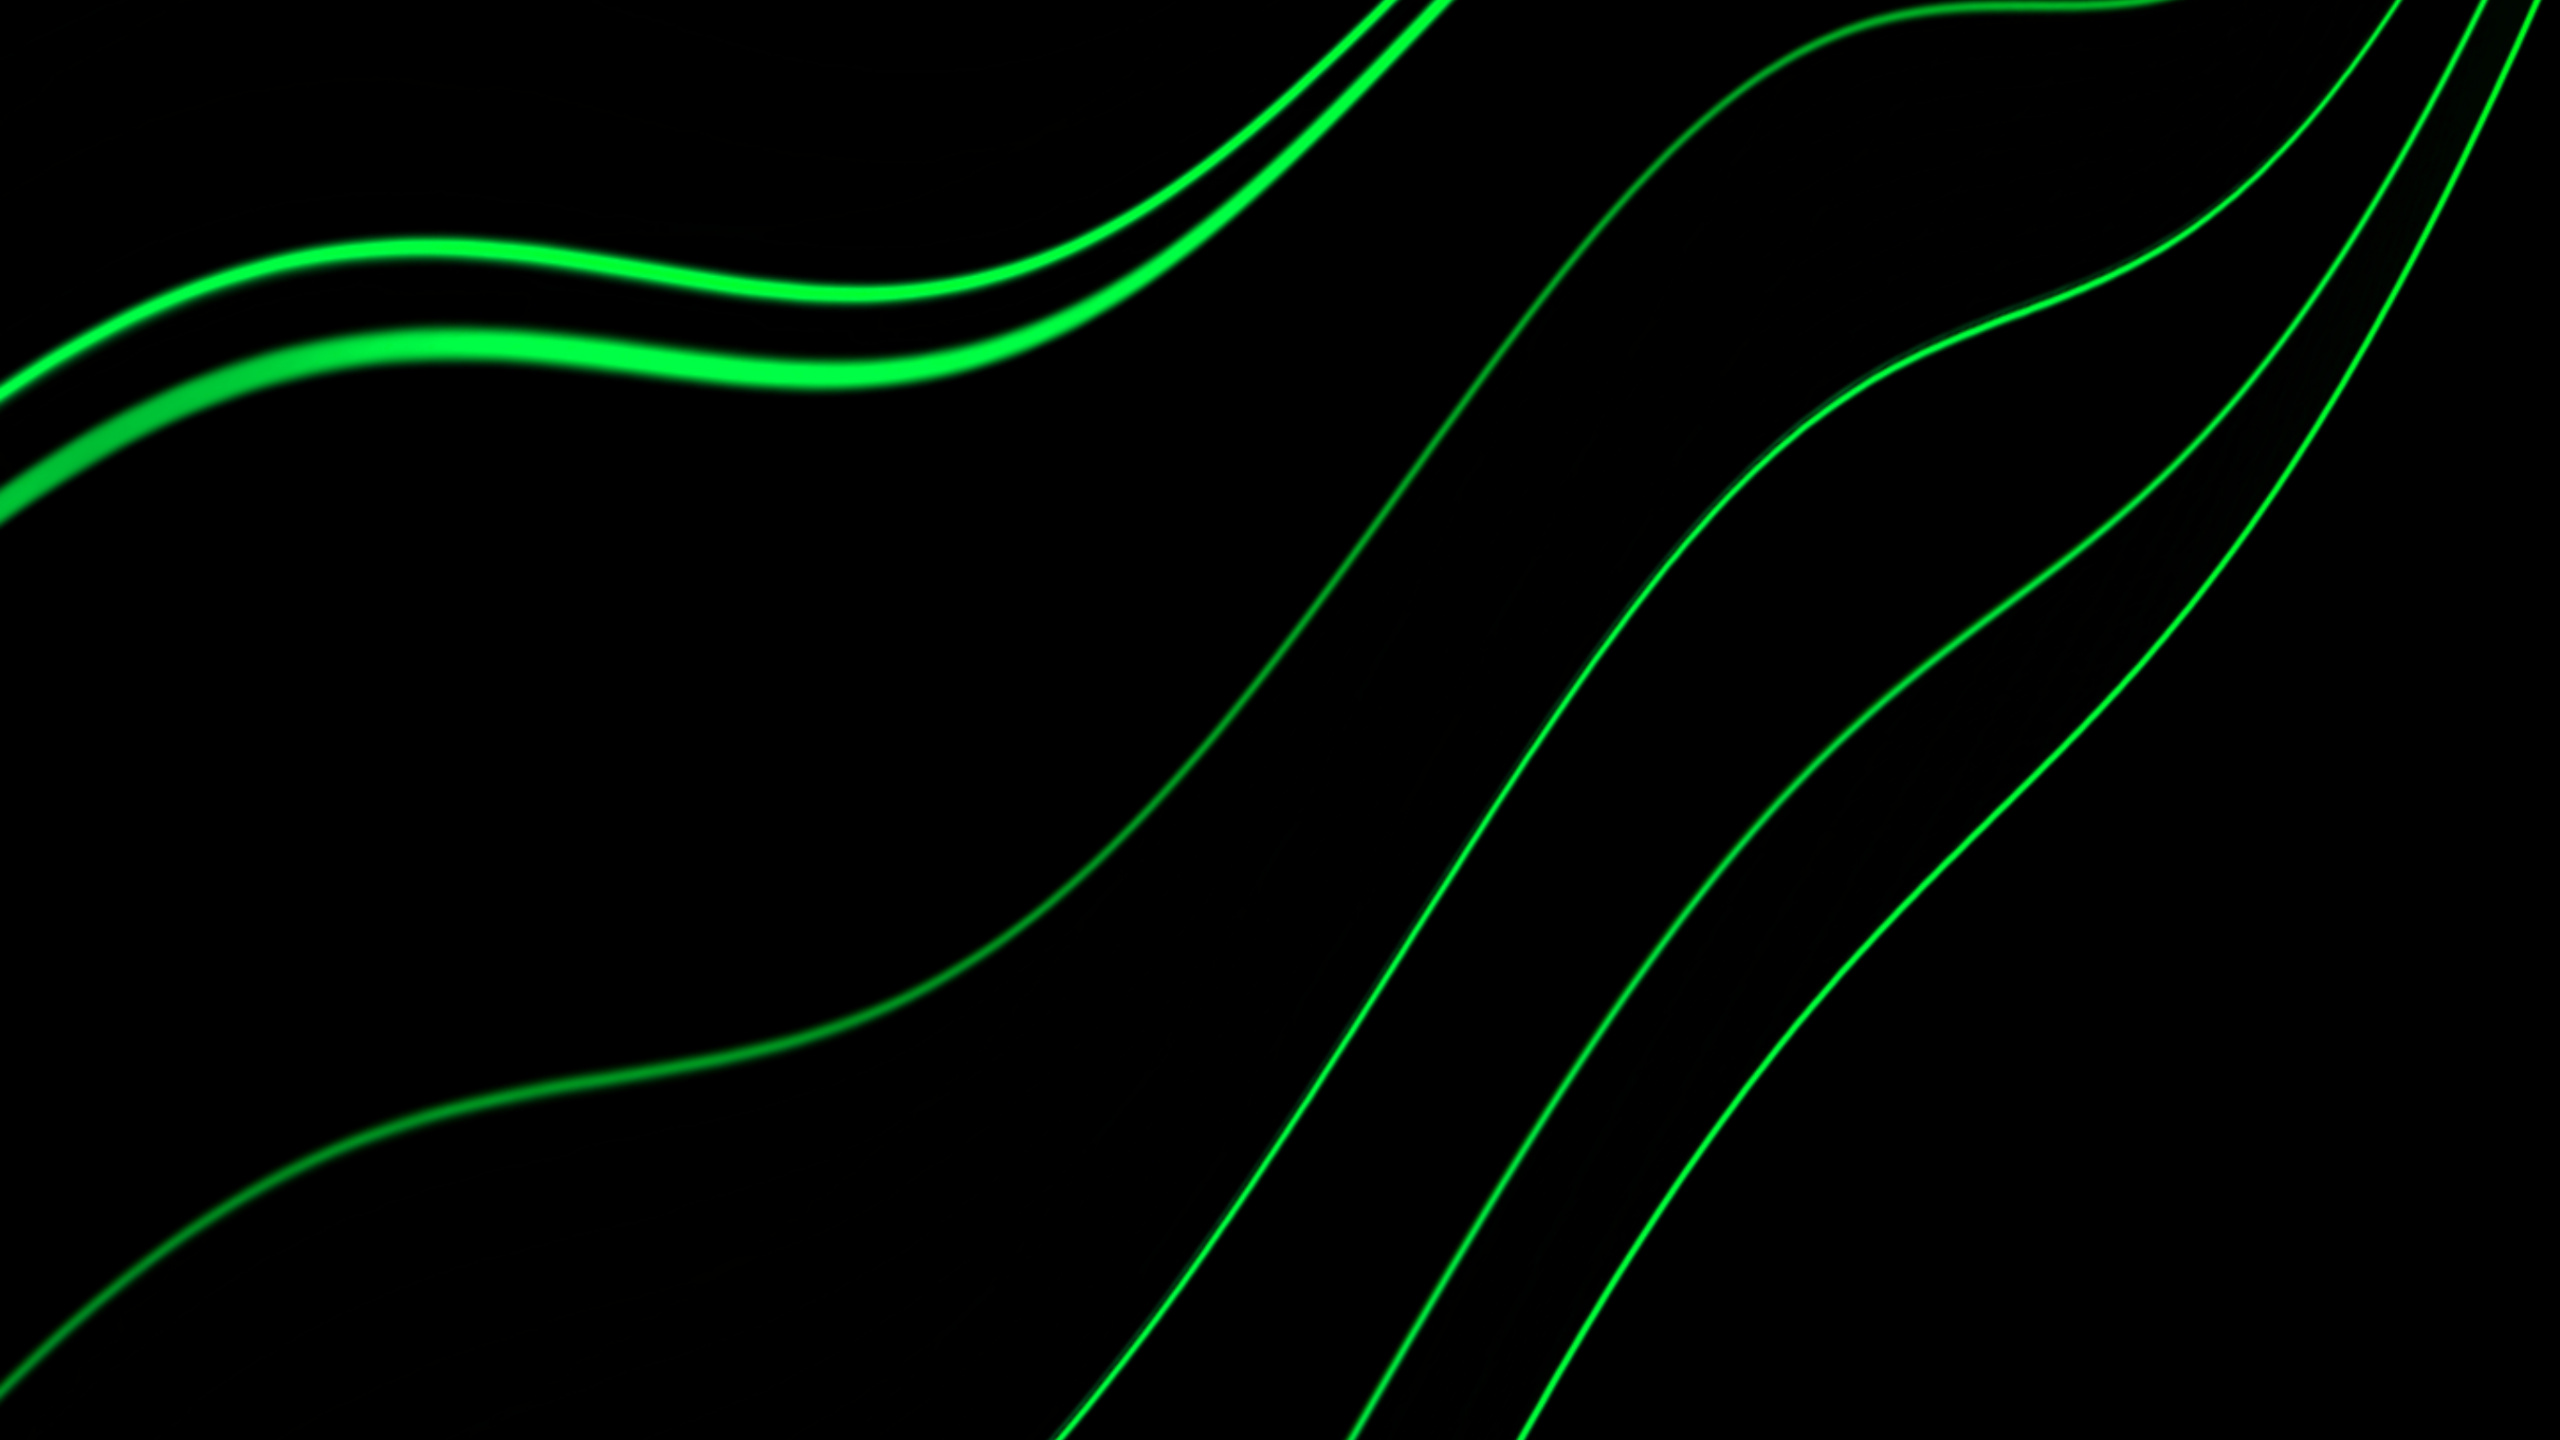 Green and White Line Illustration. Wallpaper in 2560x1440 Resolution